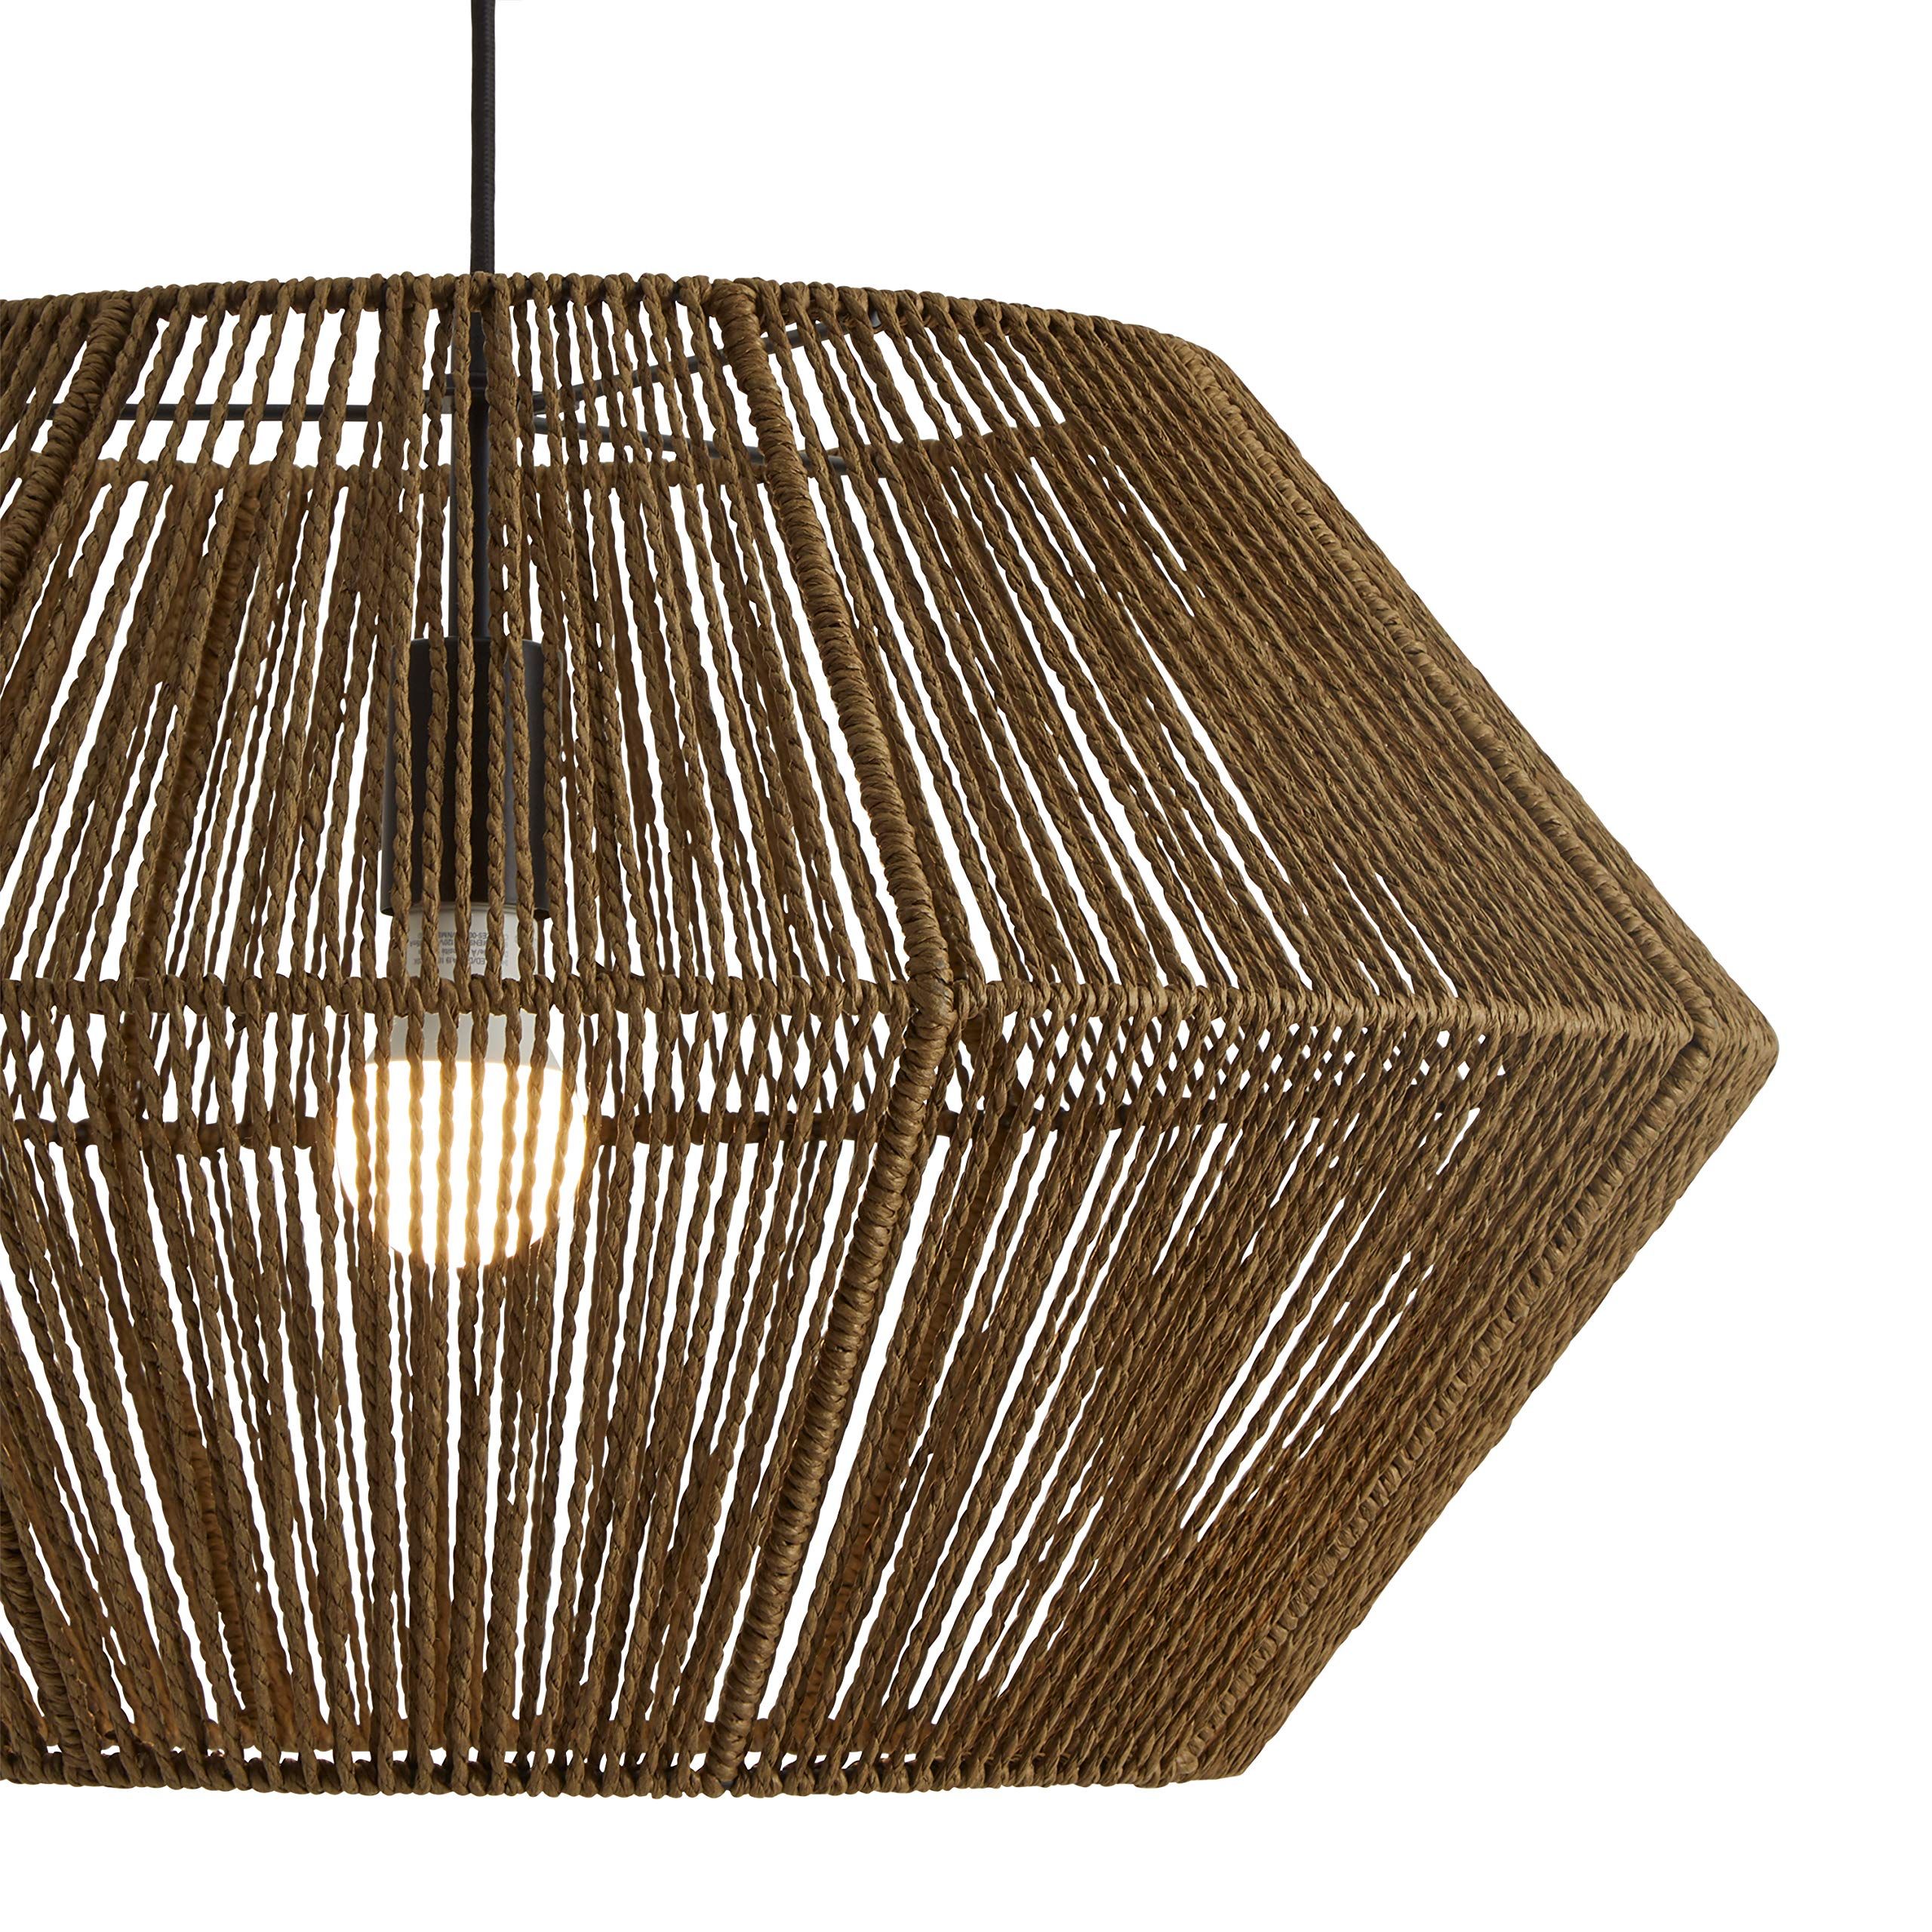 Rivet Rustic Natural Material Construction Pendant Light with Bulb, 60"H, Brown | Amazon (CA)